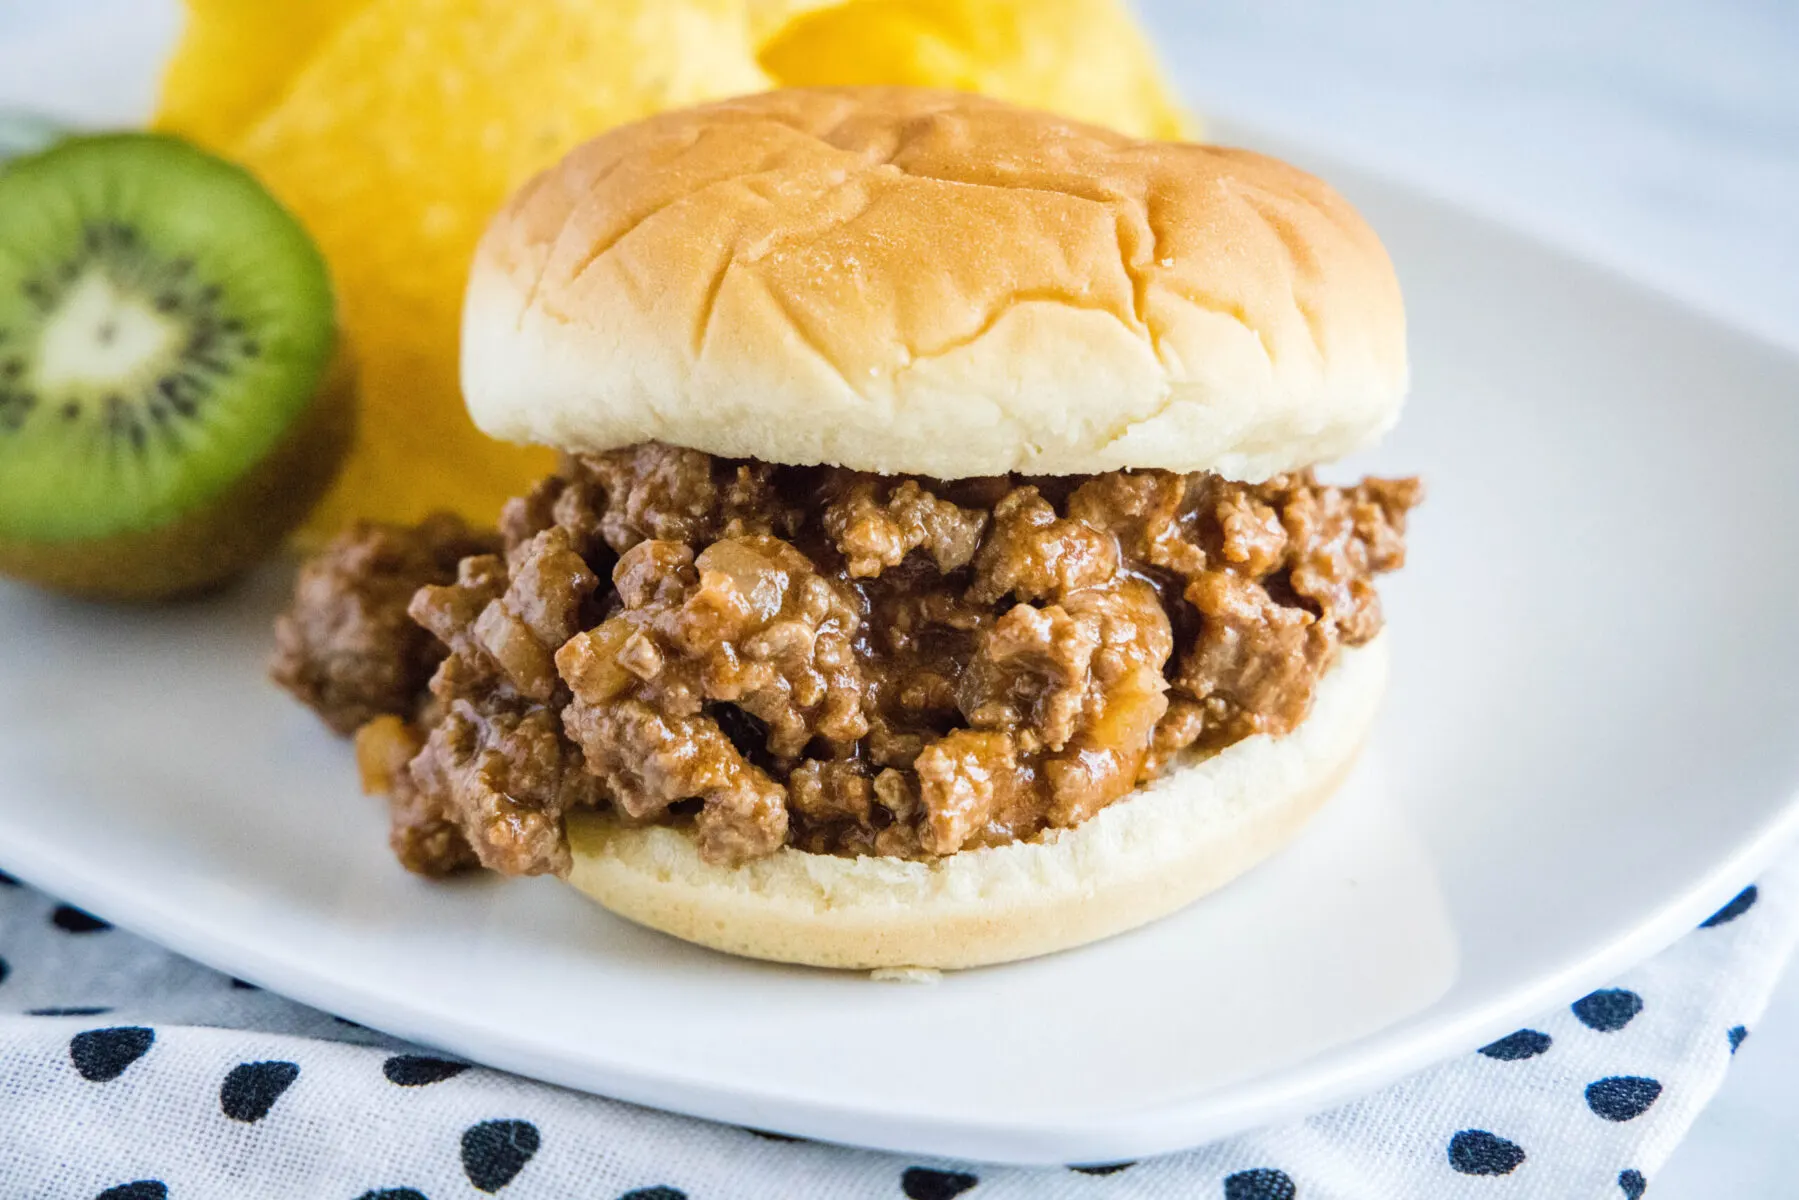 A sloppy joe sandwich on a plate with chips and a kiwi